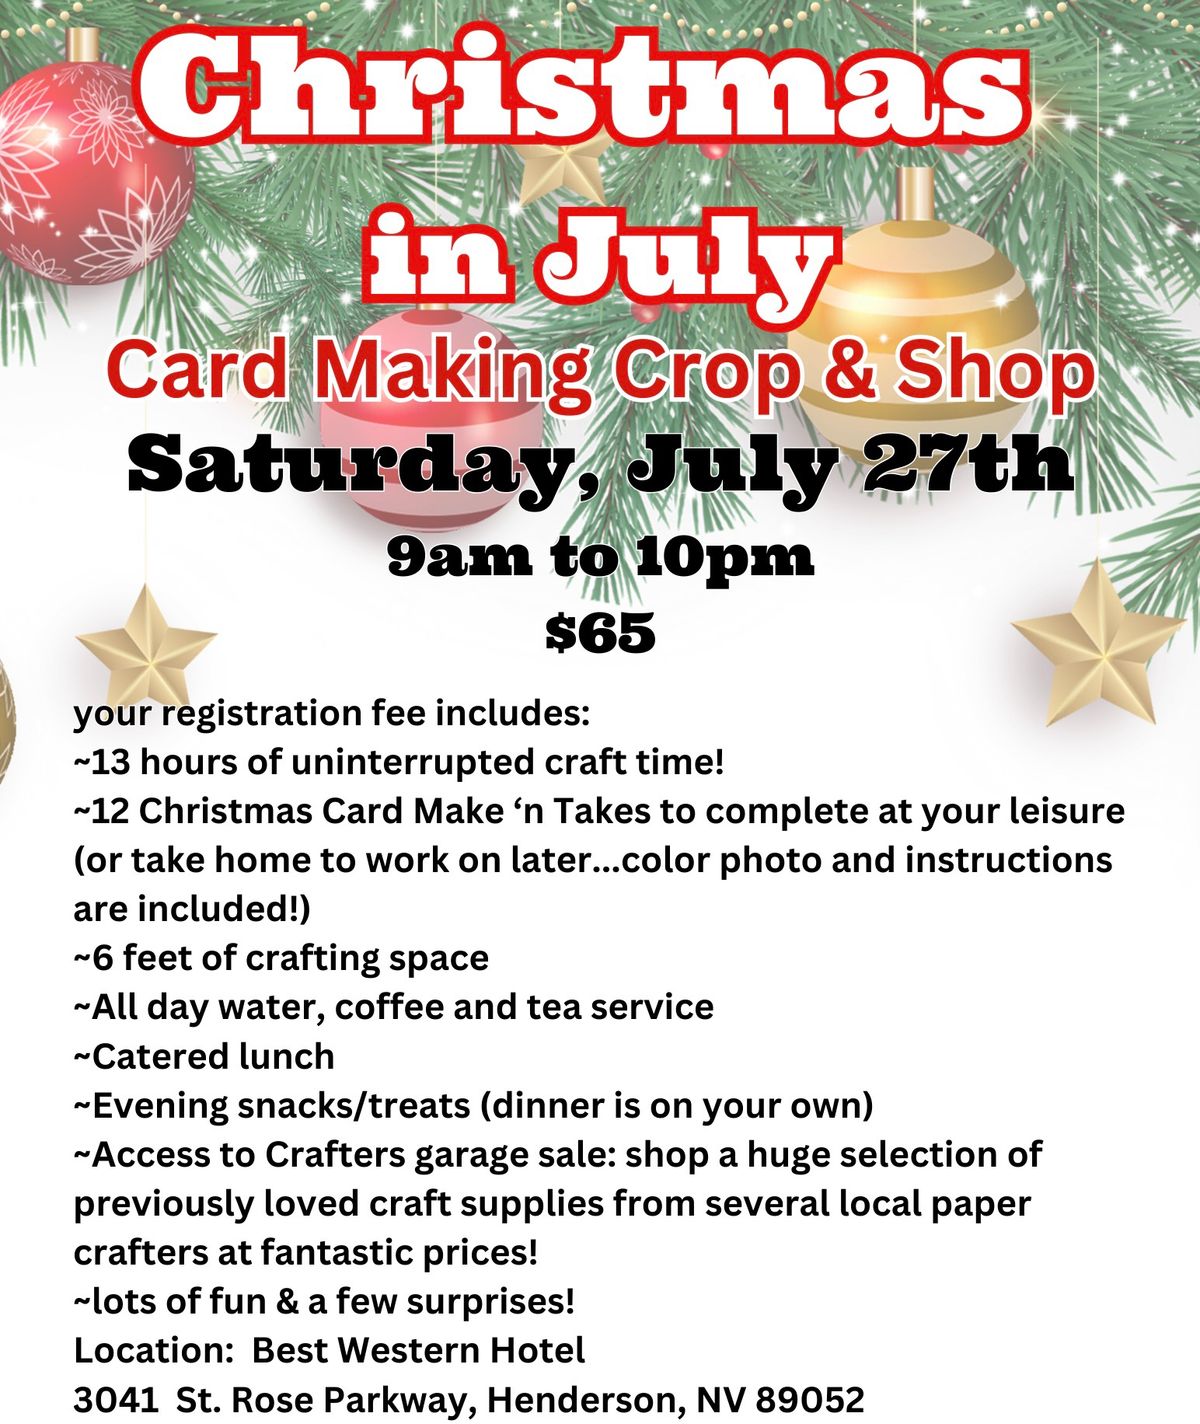 Christmas in July Card Making Crop & Shop!